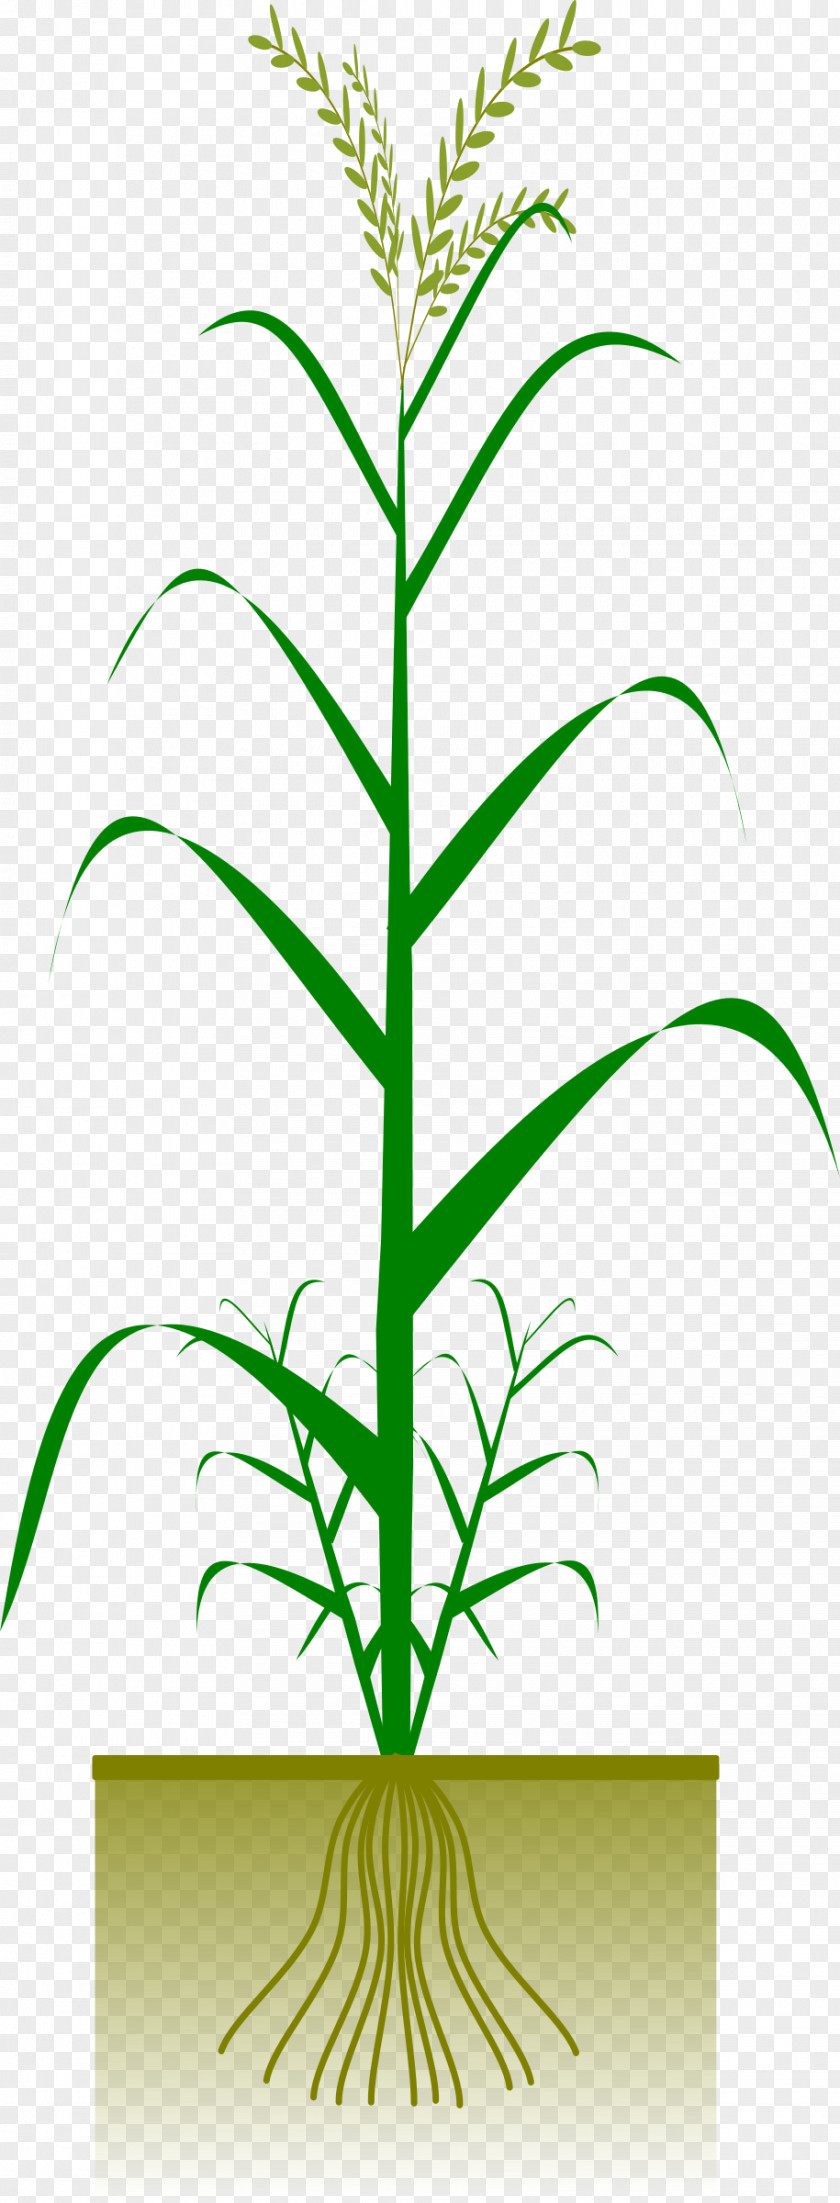 Rice Maize Plant Crop Cereal Clip Art PNG